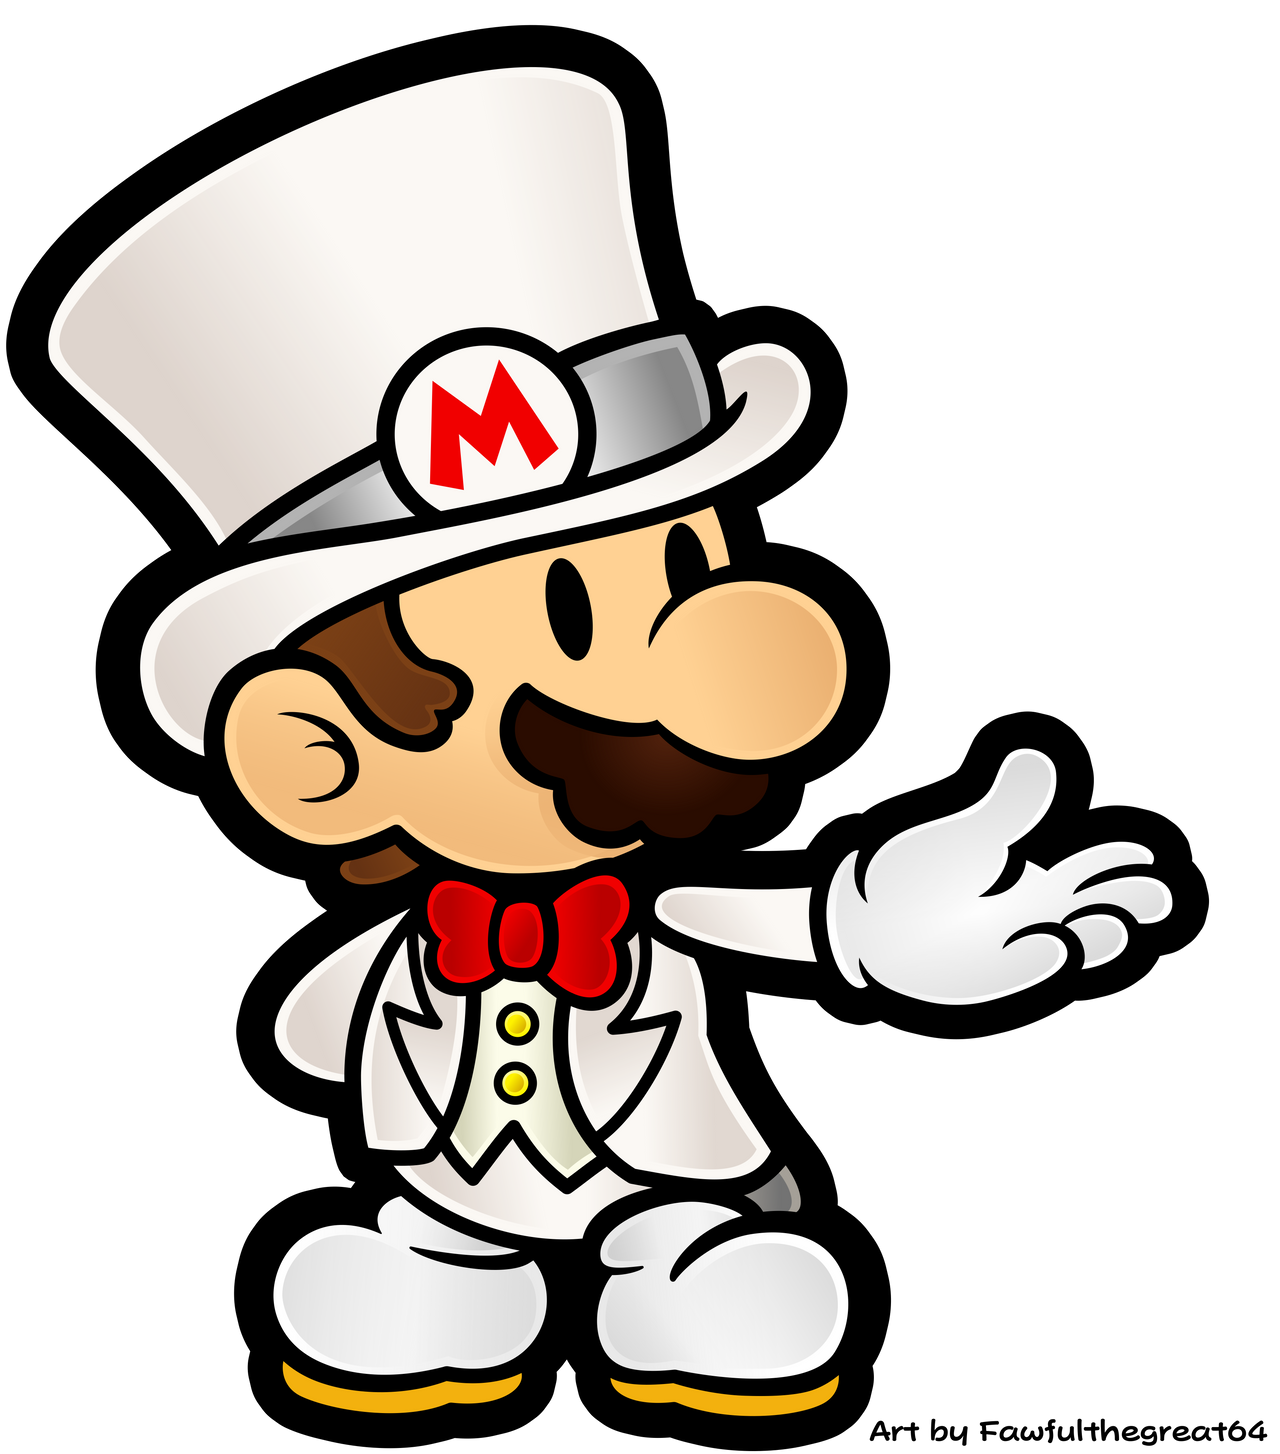 paper_mario___wedding_tux_by_fawfulthegreat64-dcjq17c.png